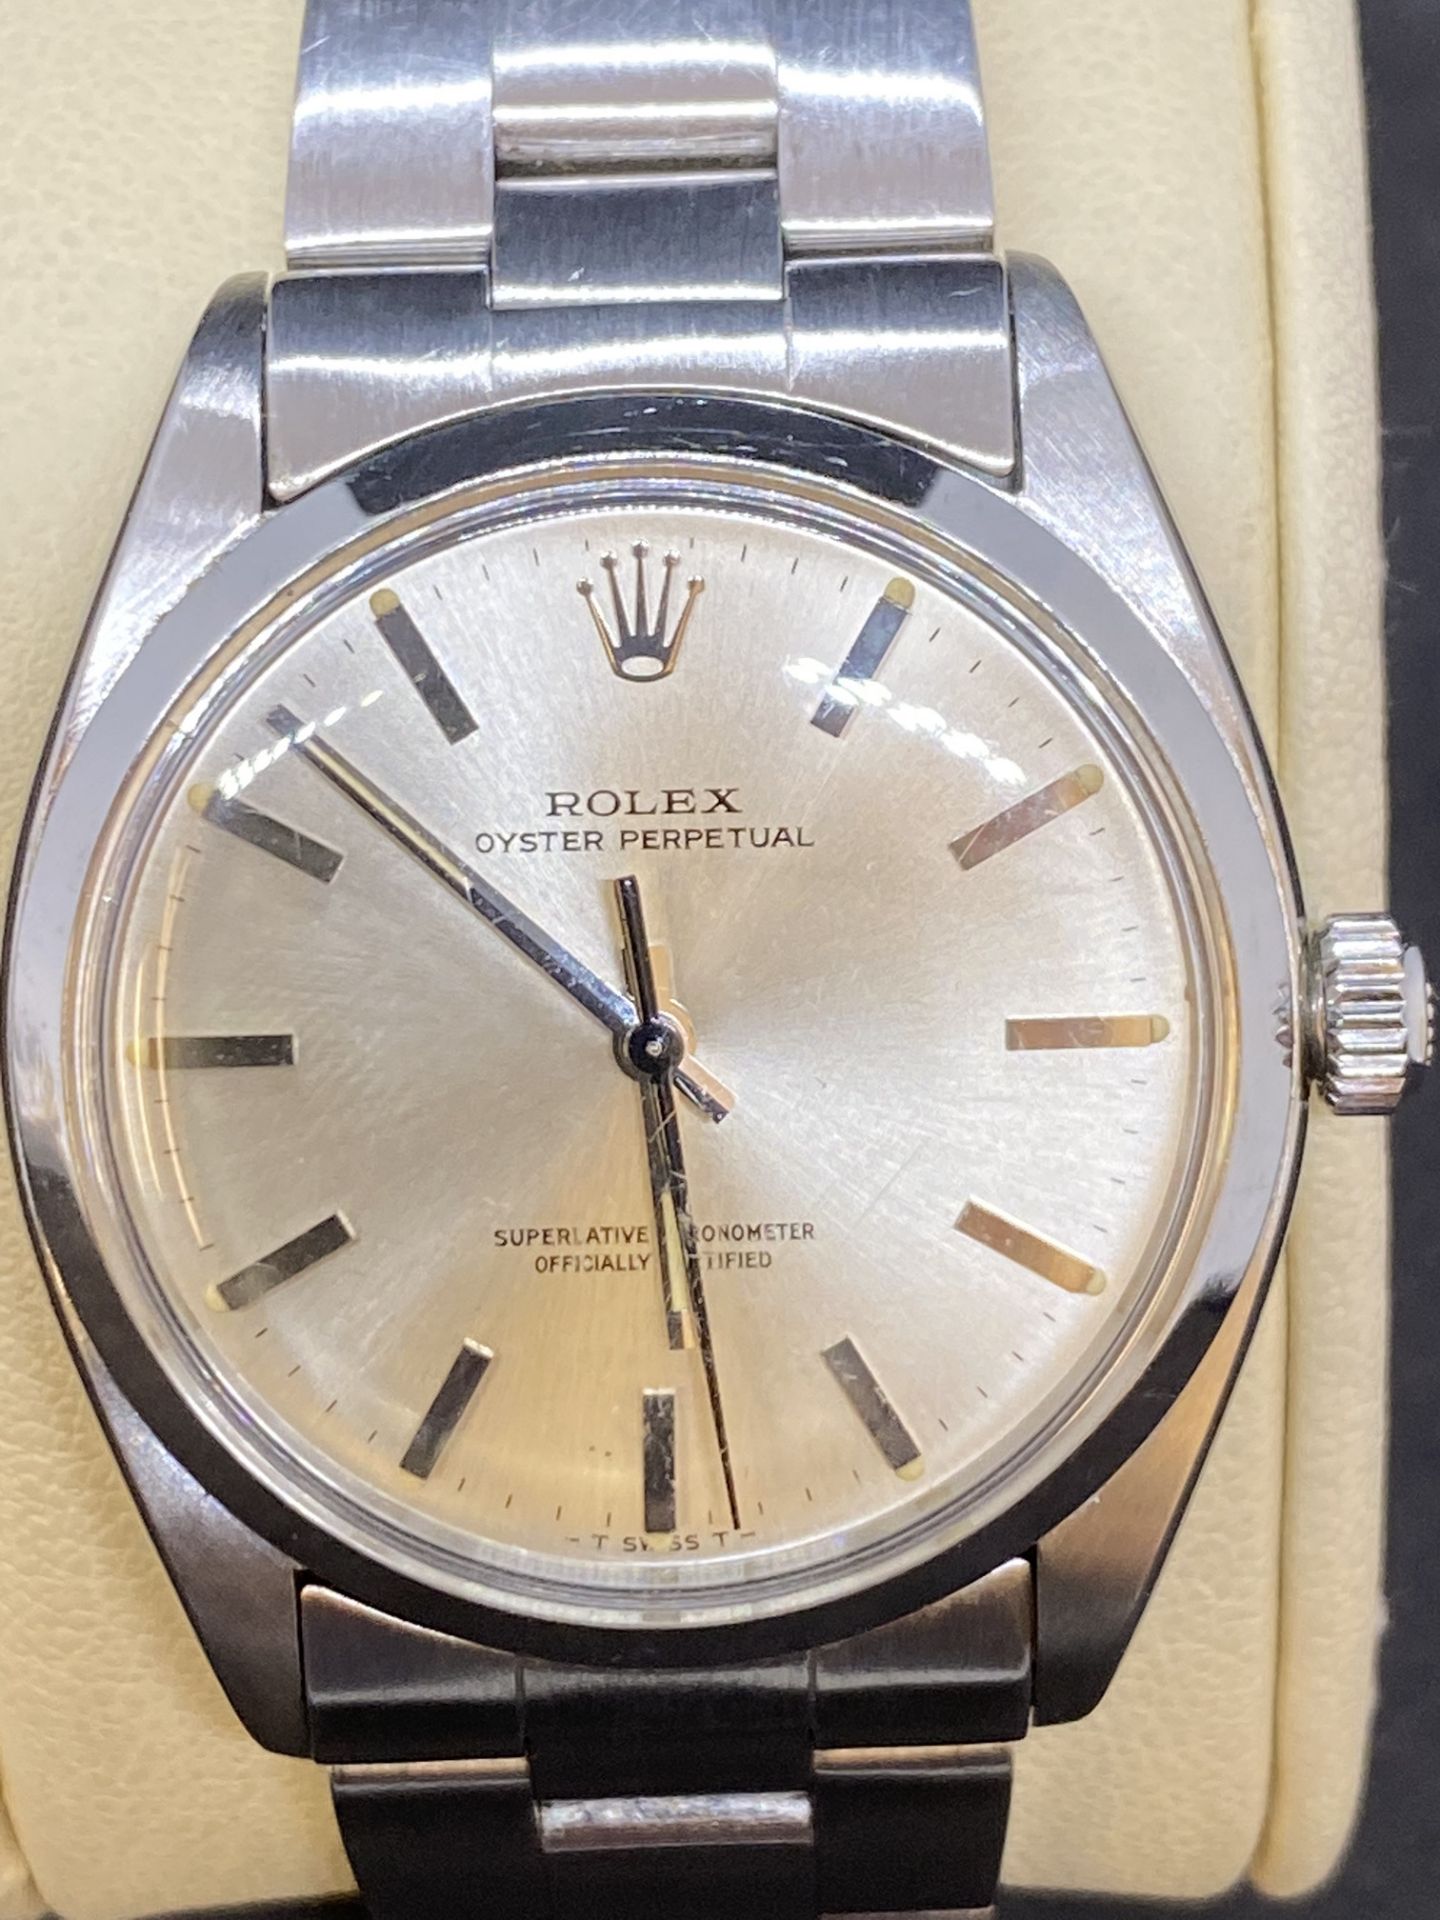 ROLEX OYSTER PERPETUAL STAINLESS STEEL AUTOMATIC WATCH - Image 3 of 7